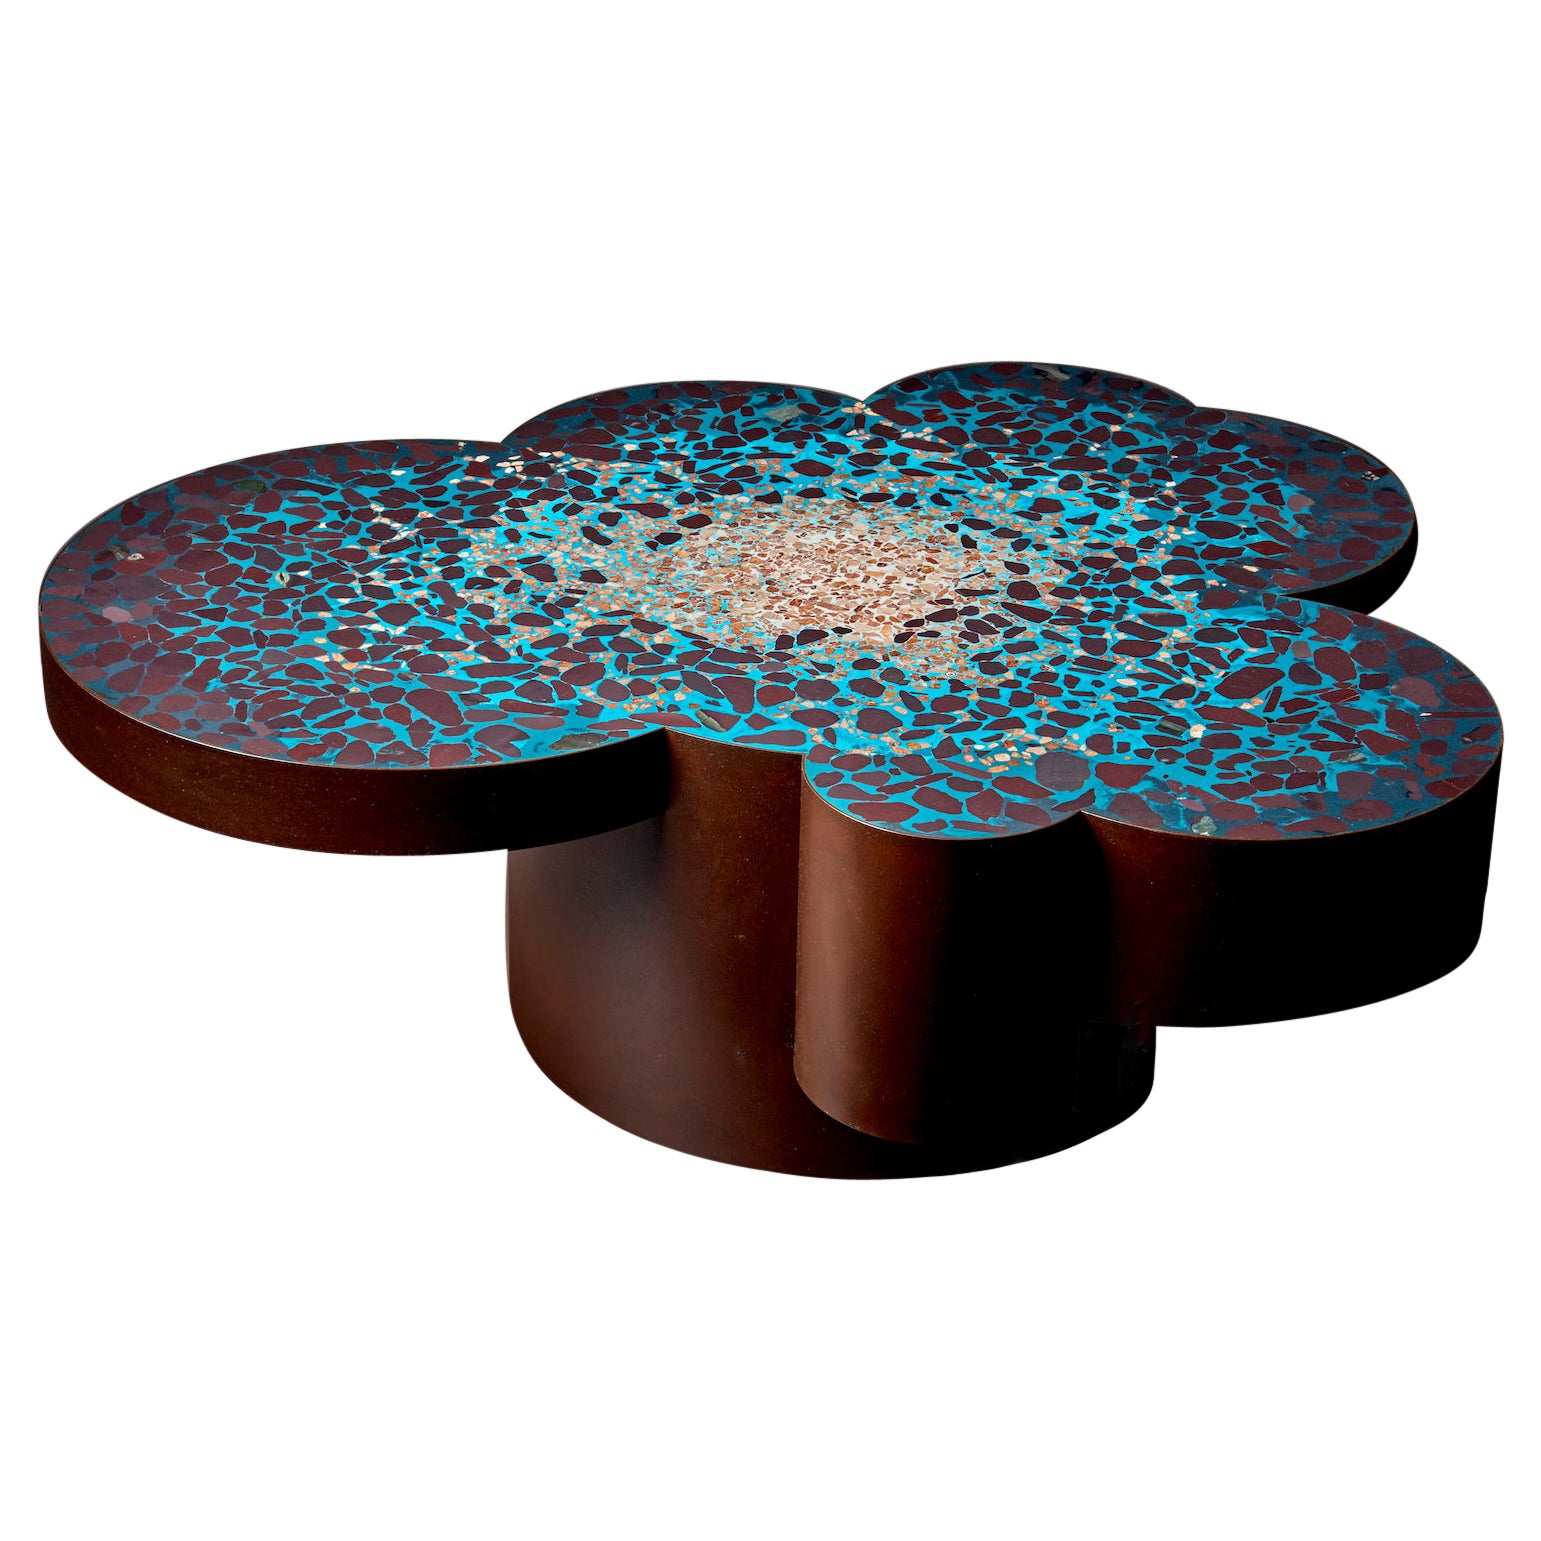 Handcrafted Felix Muhrhofer Blue Turquoise Terrazzo Coffee Table Pope Bella nova For Sale